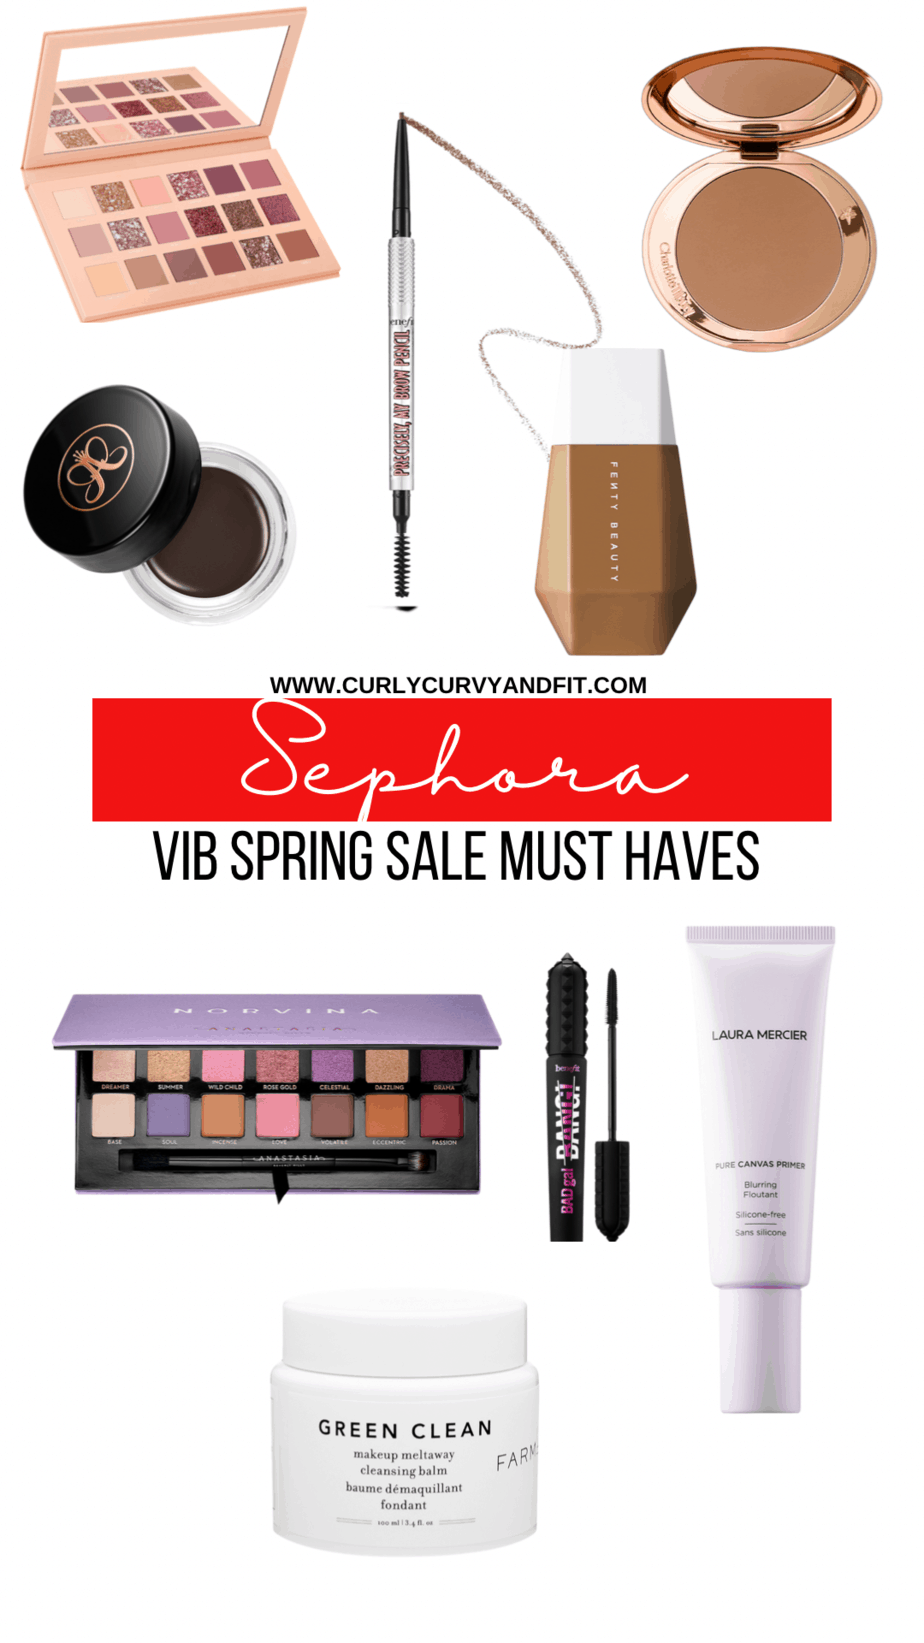 Sephora Spring Sale Event Products You Need to Buy